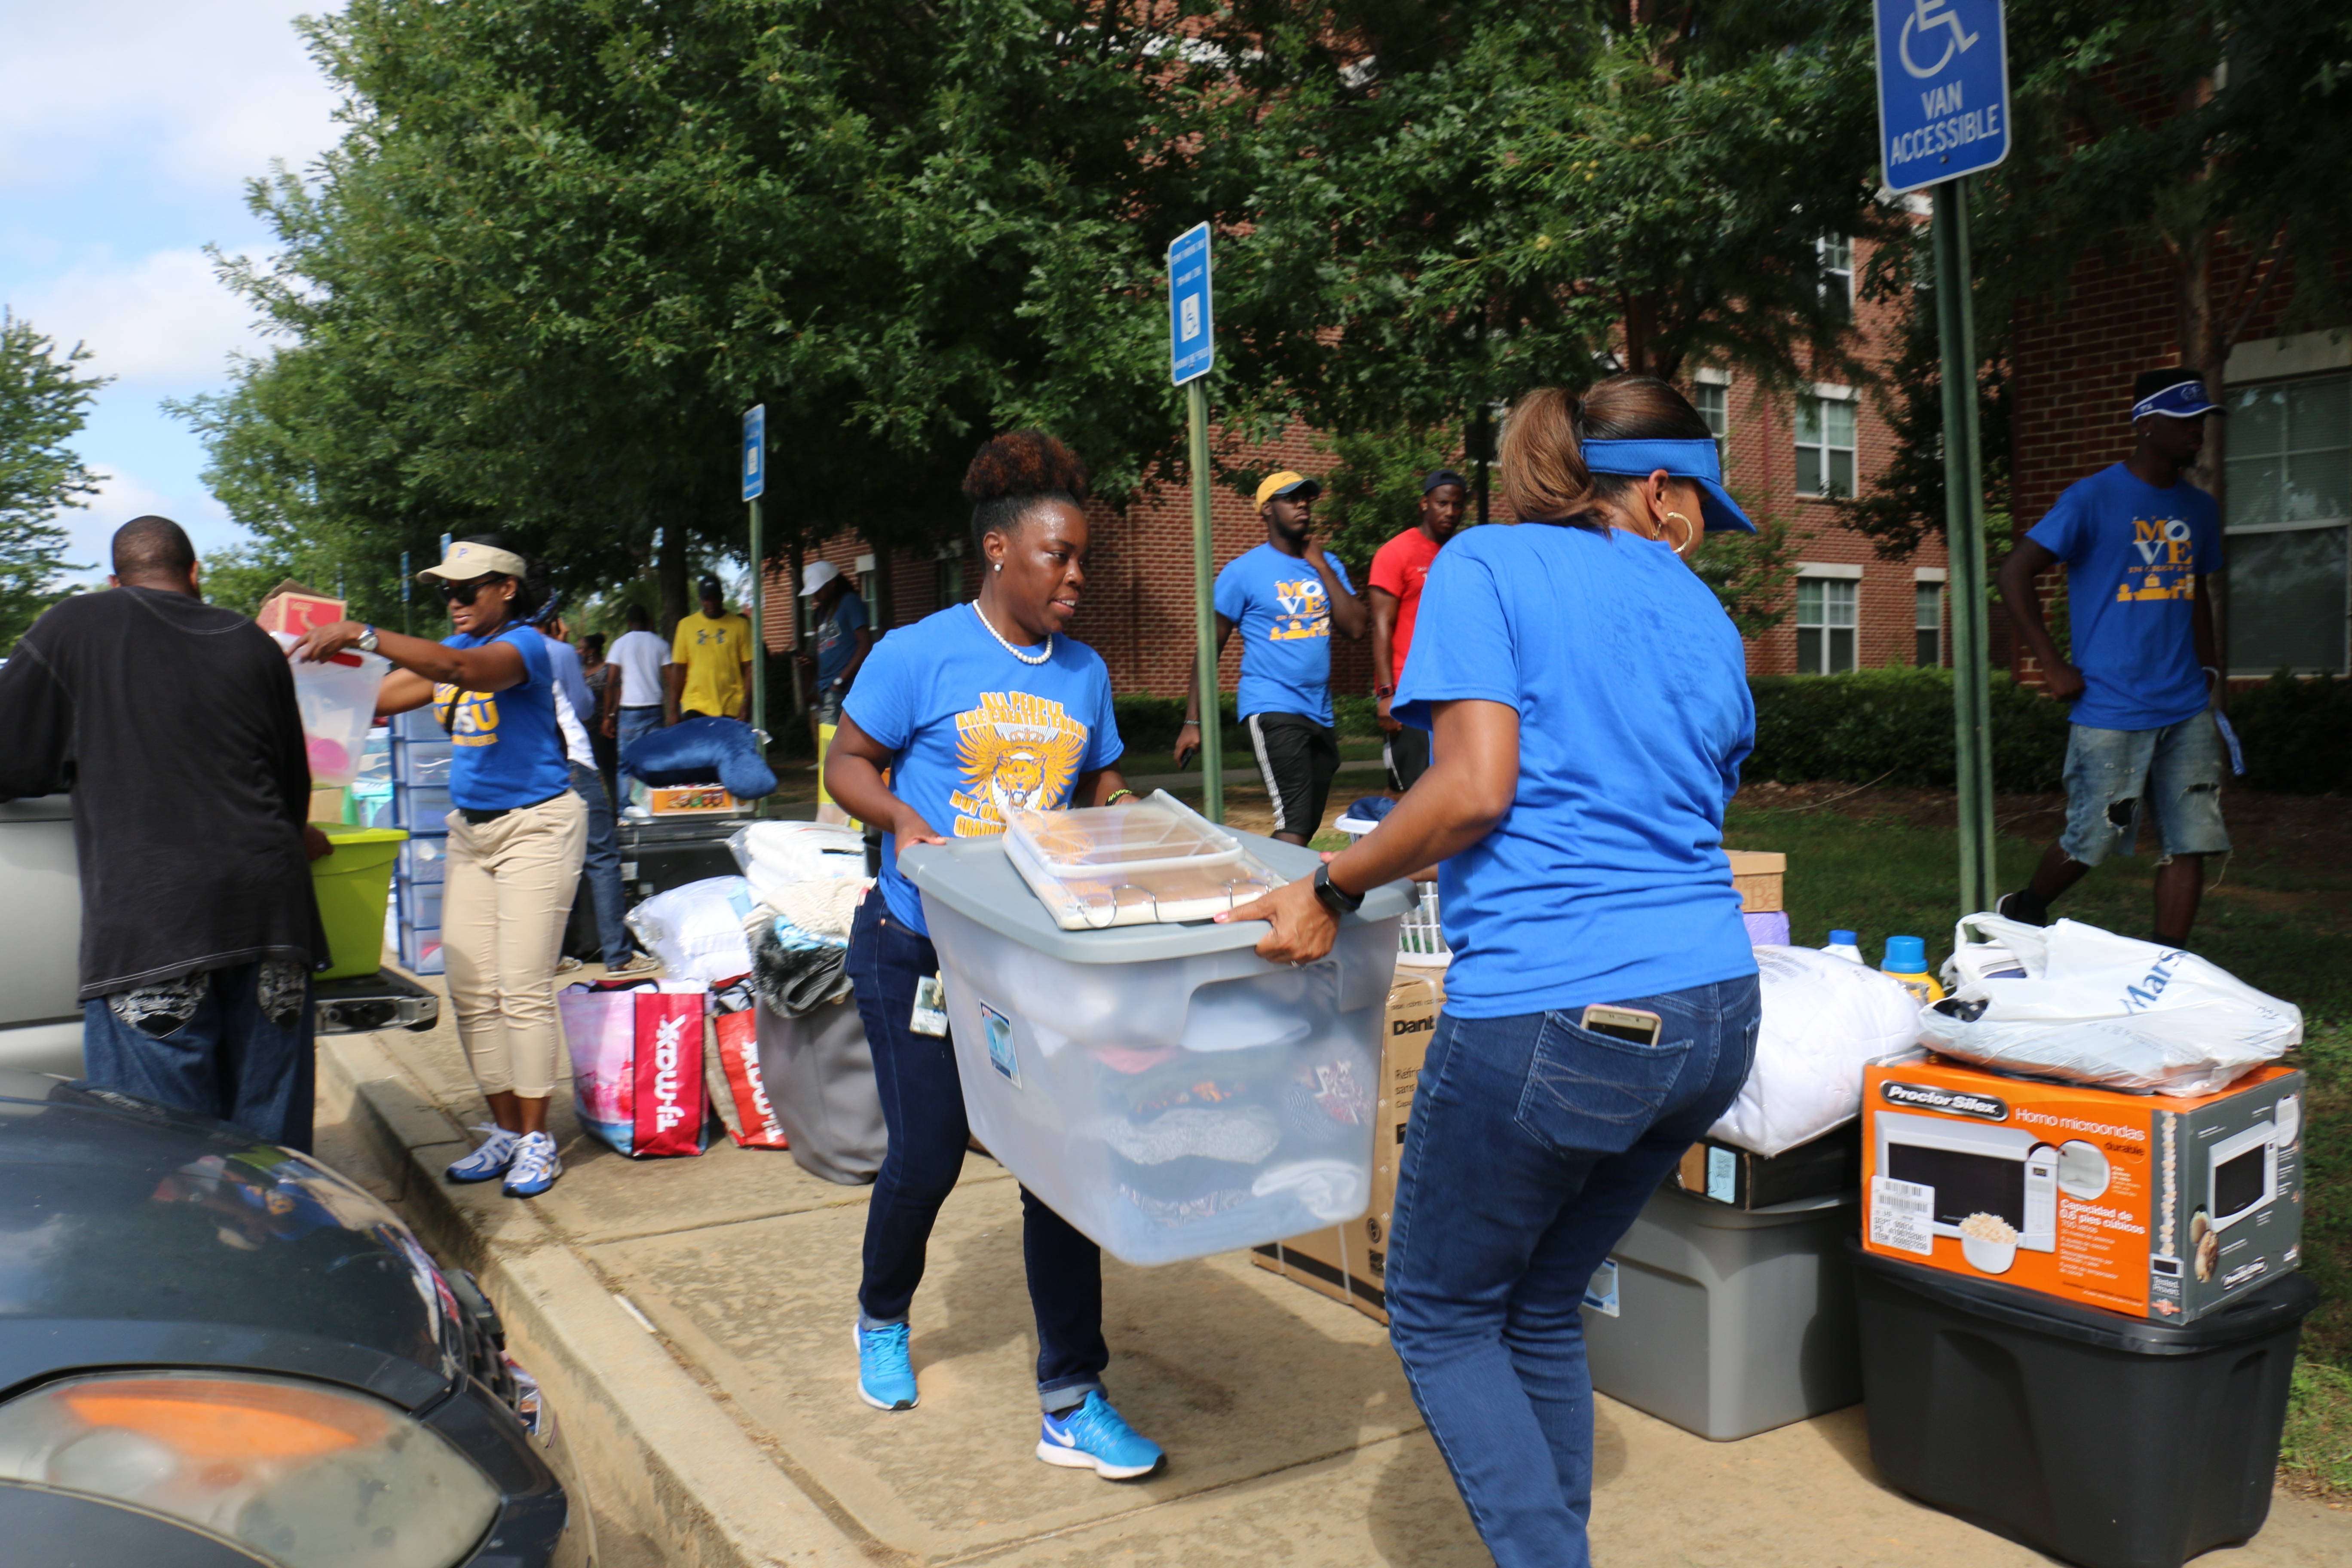 Students and parents at move-in day on FVSU campus